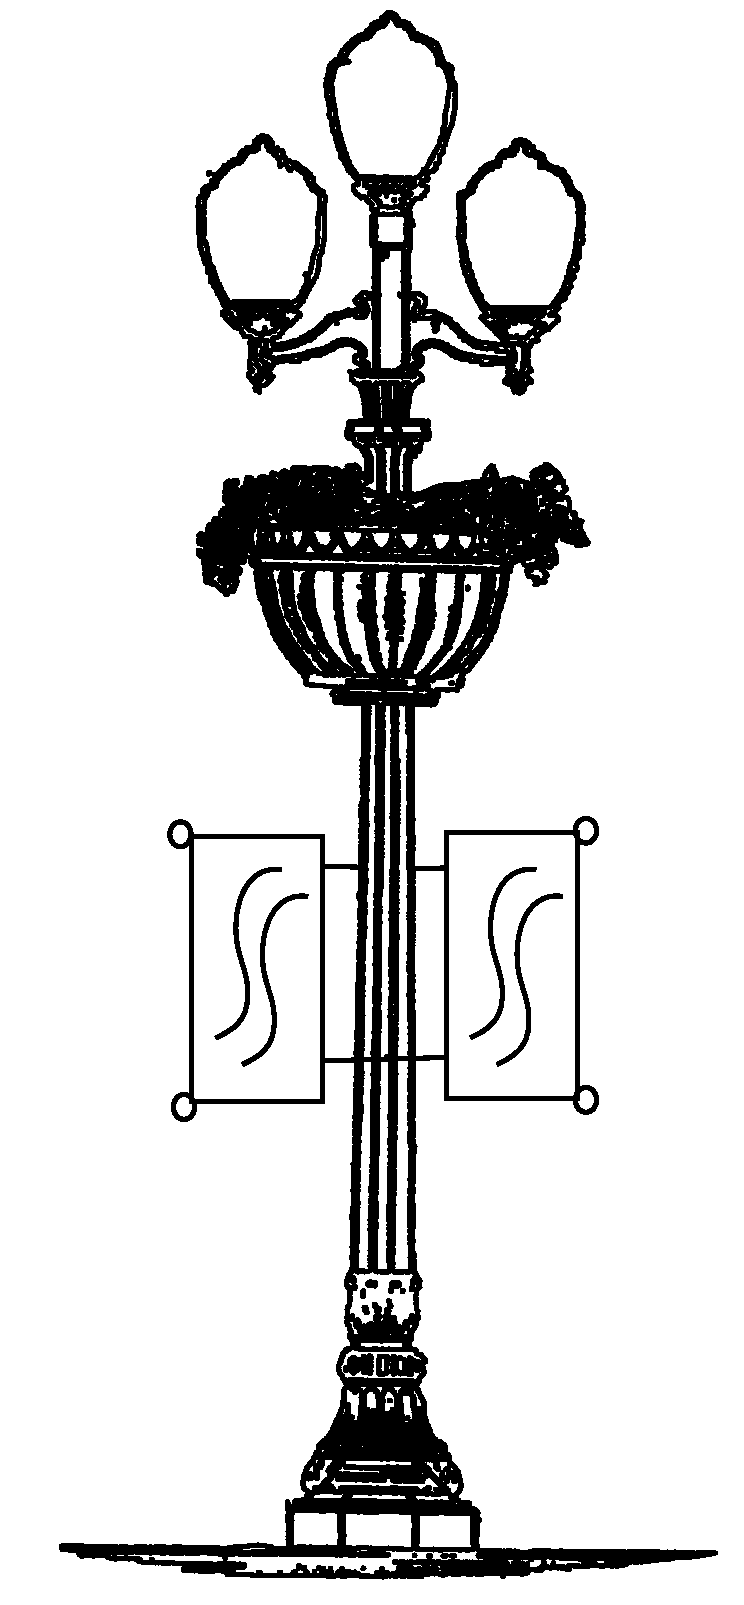 Adjustable height planter with an optional waterfall, and/or an adjustable irrigation system for controllably watering the planter and surrounding terrain